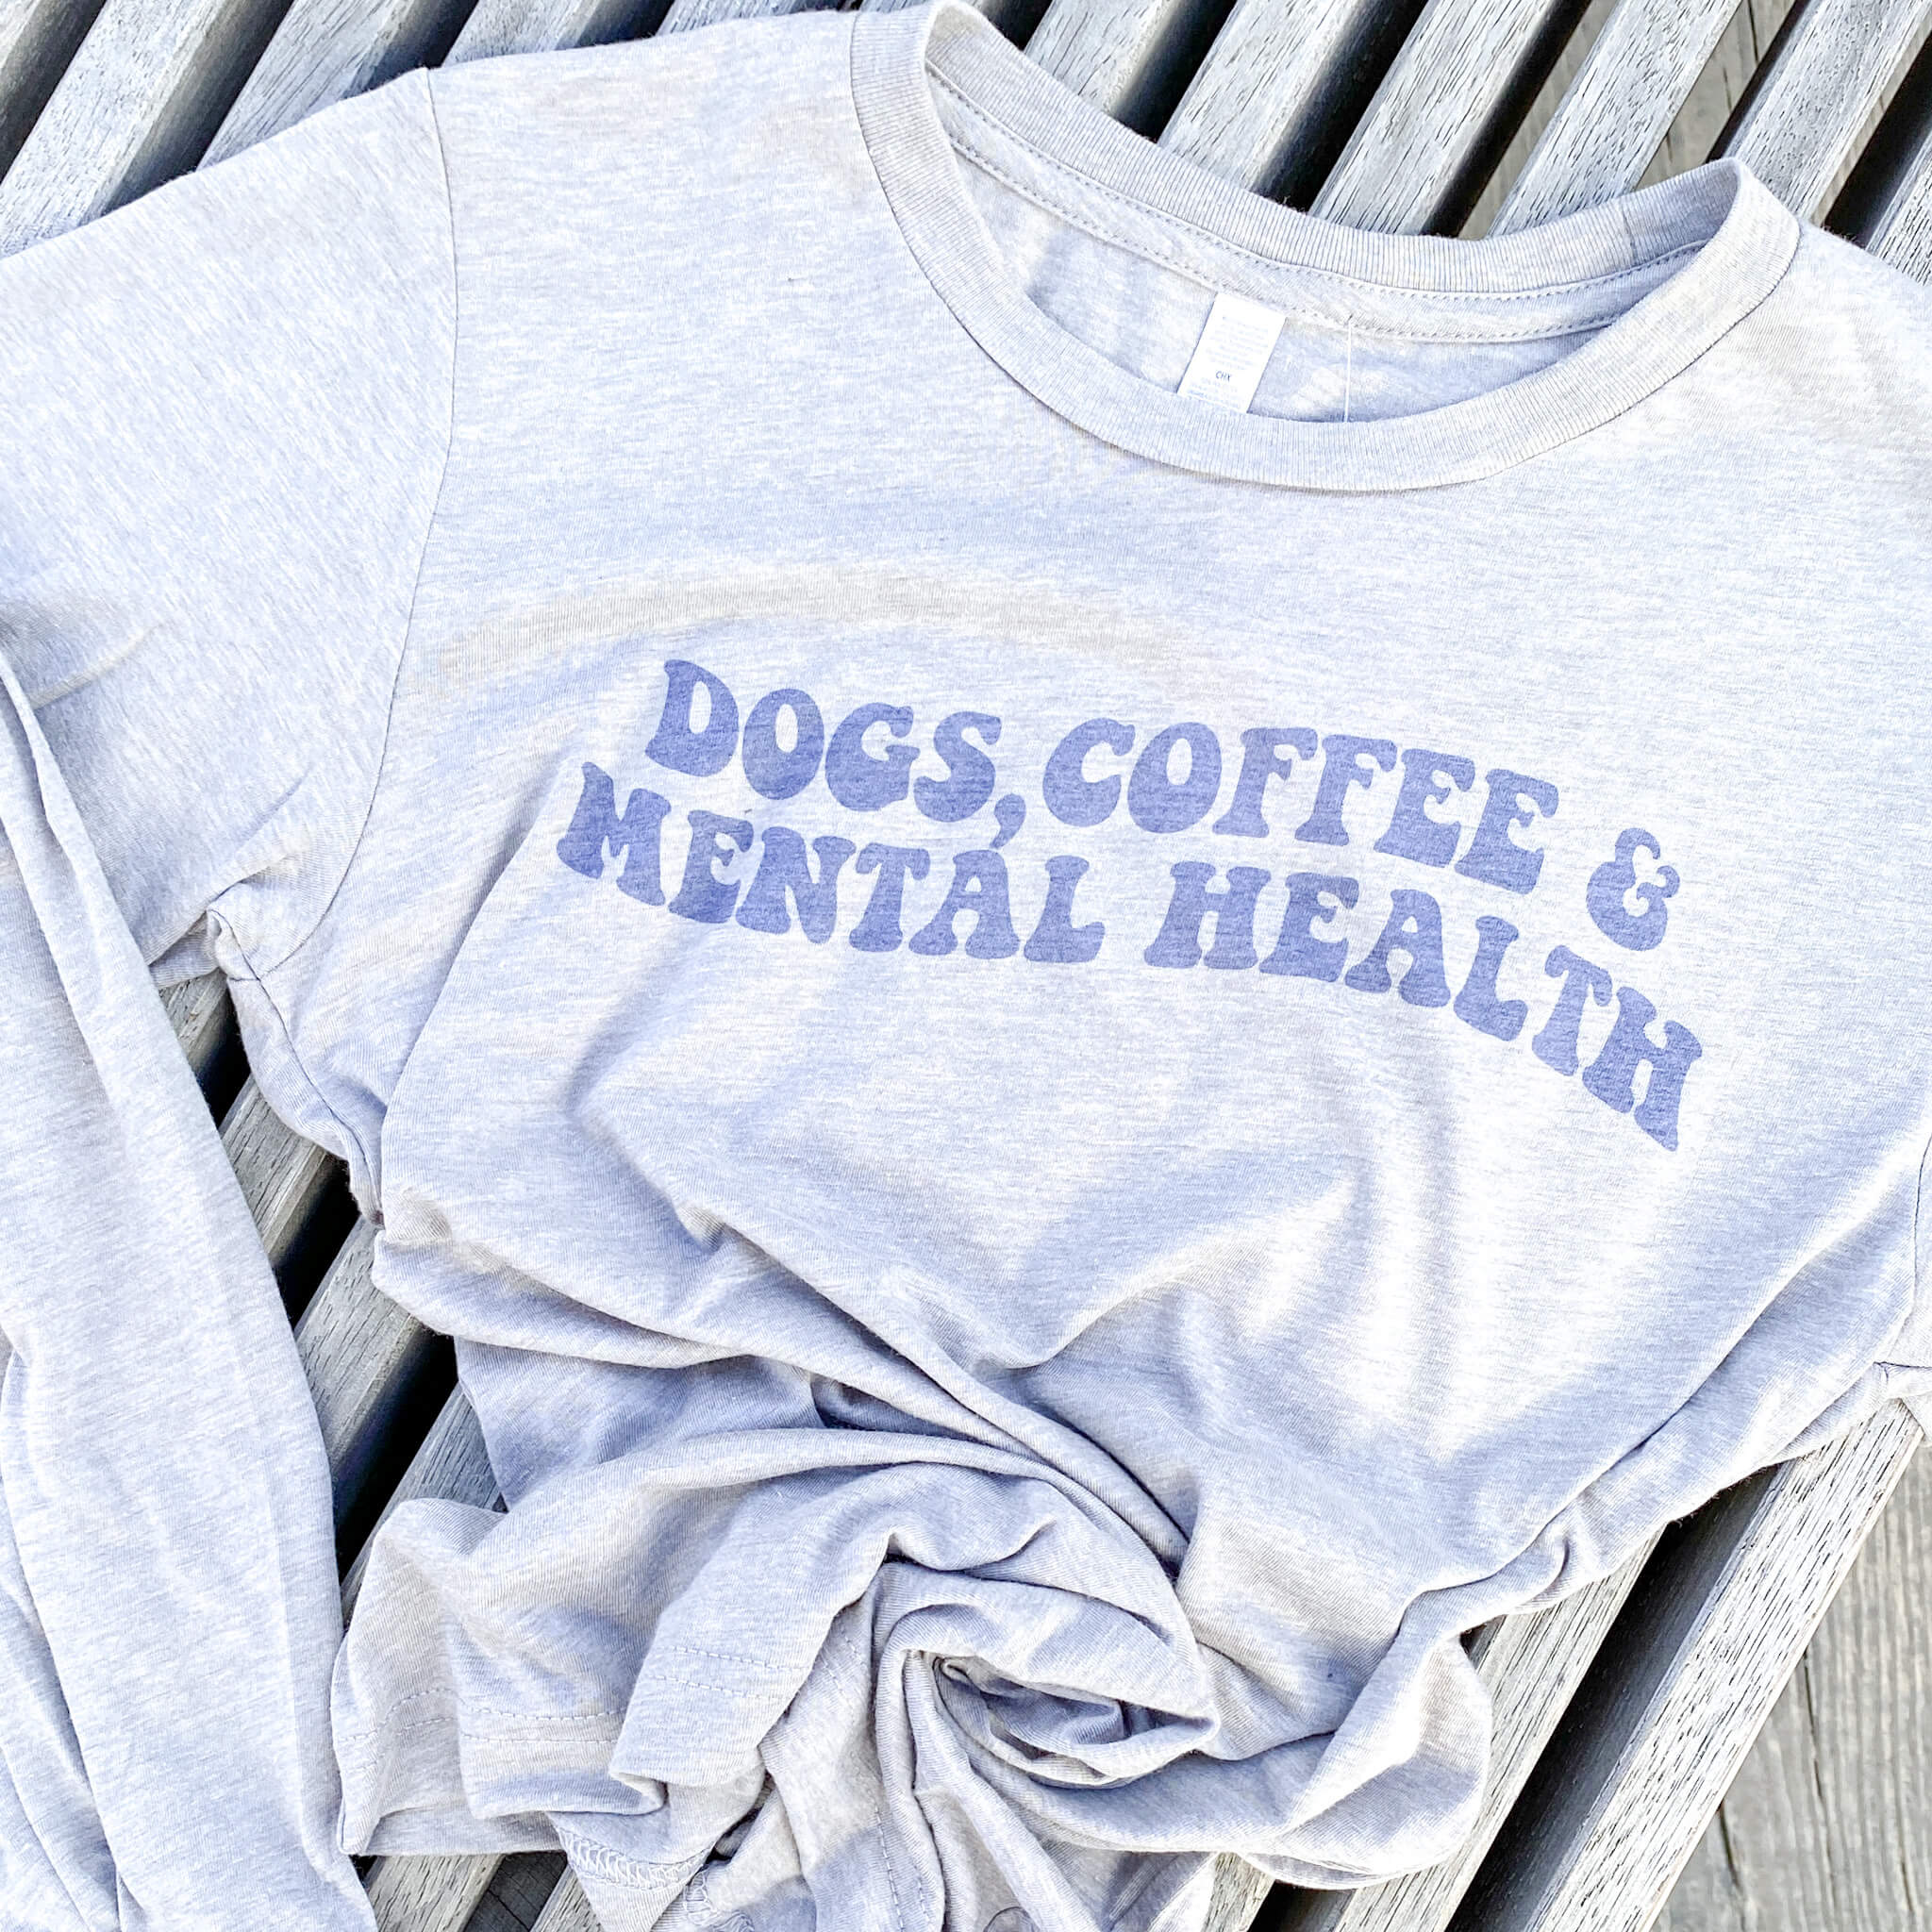 Dogs and Coffee Shirt, Dog Owner Tee Shirt